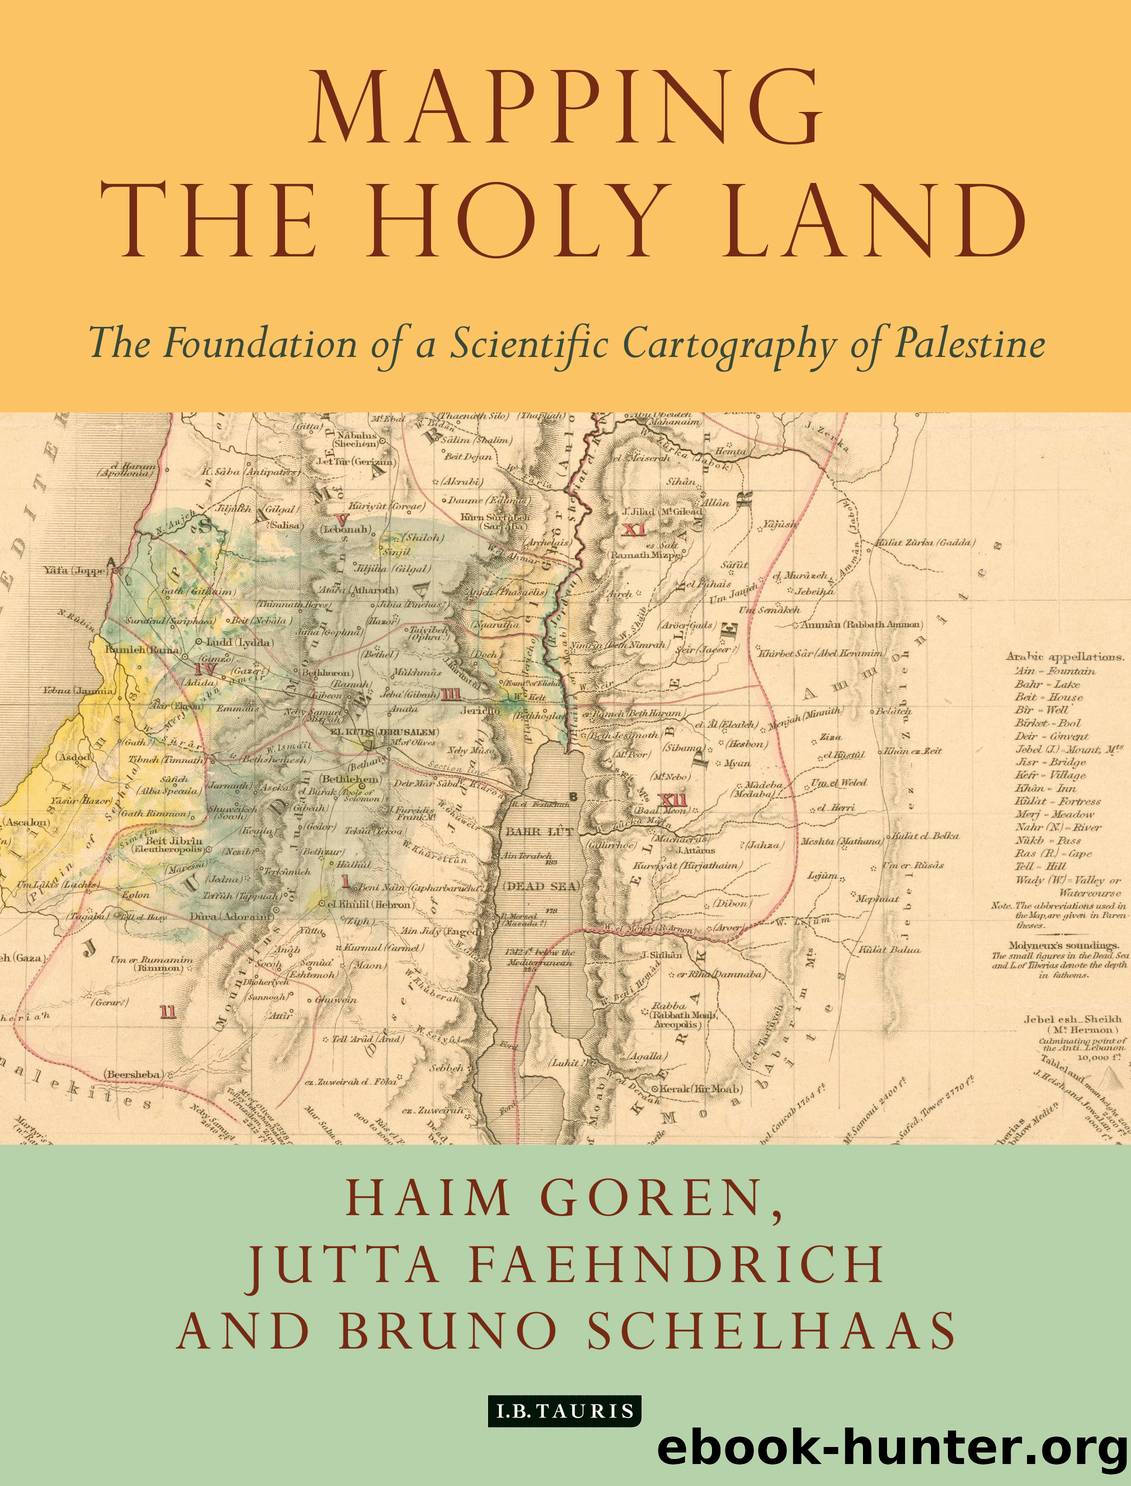 Mapping the Holy Land by Haim Goren